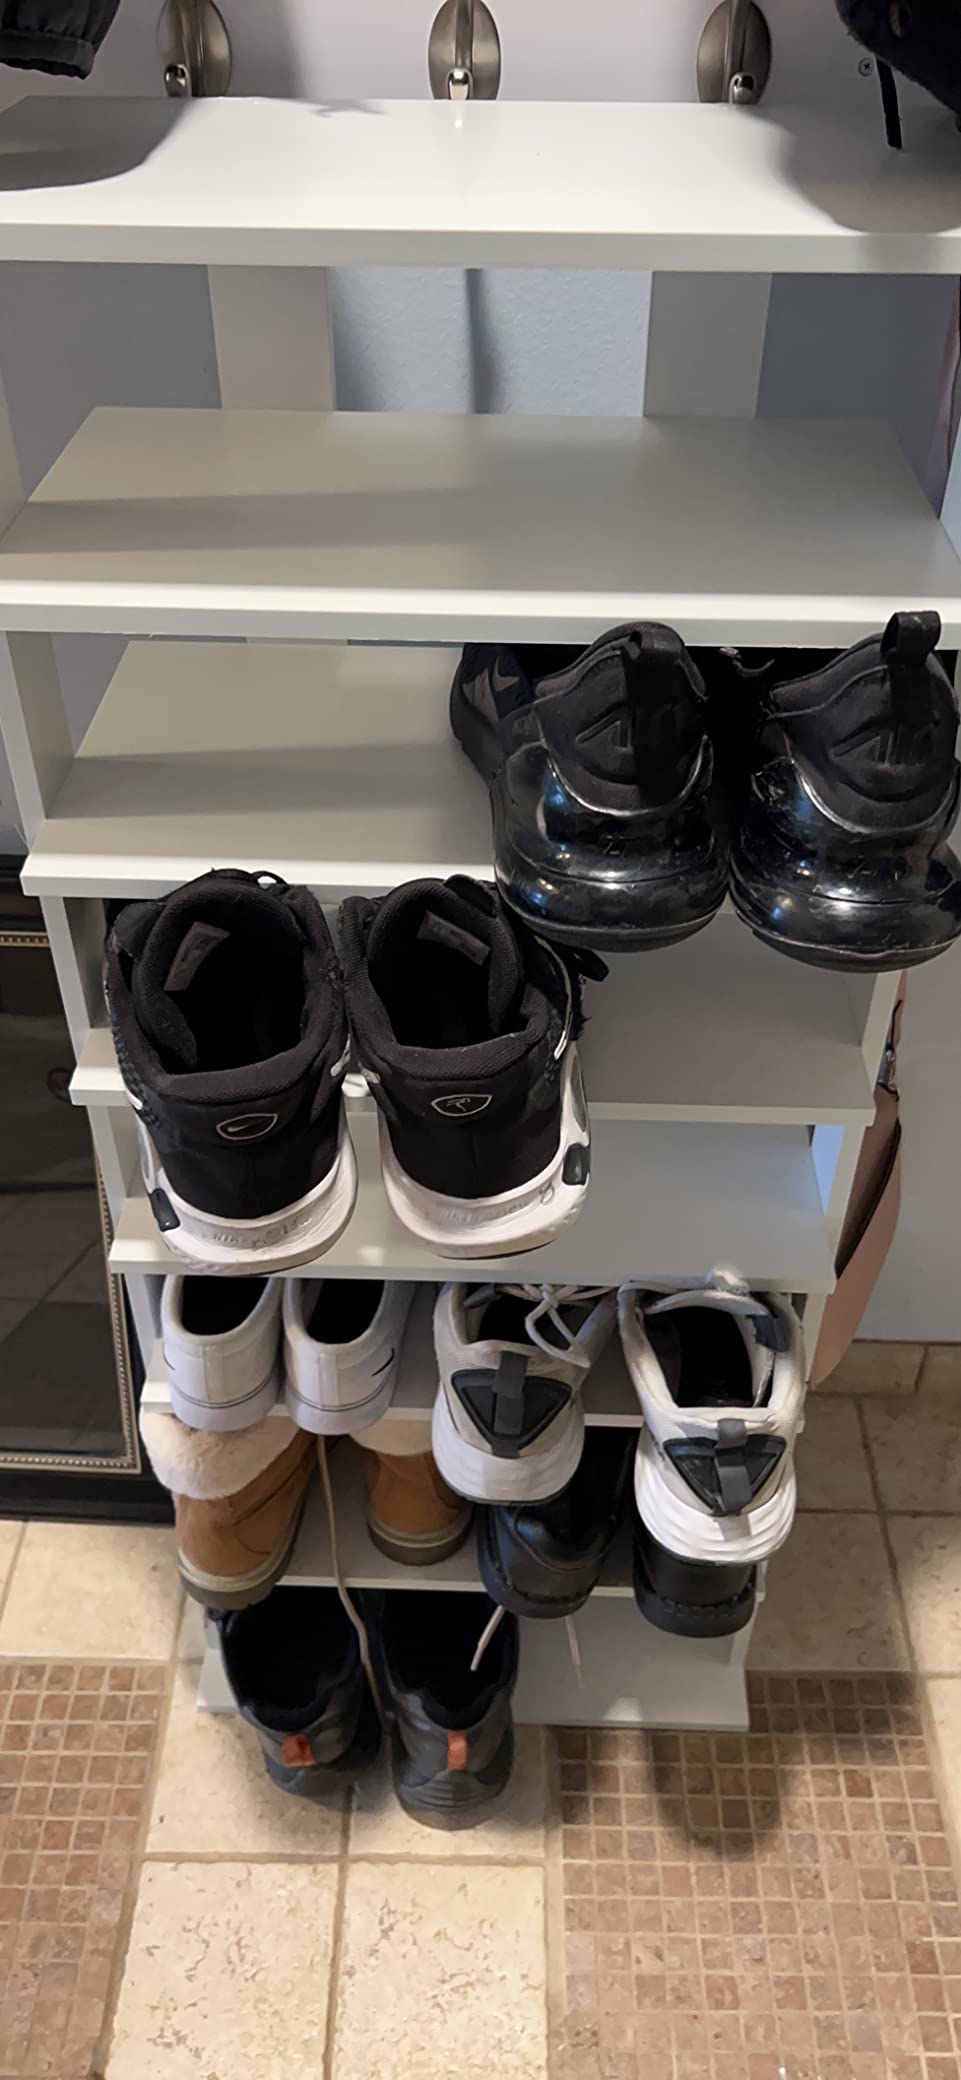 . This is a great shoe storage solution for size 9 and below woman's shoes.